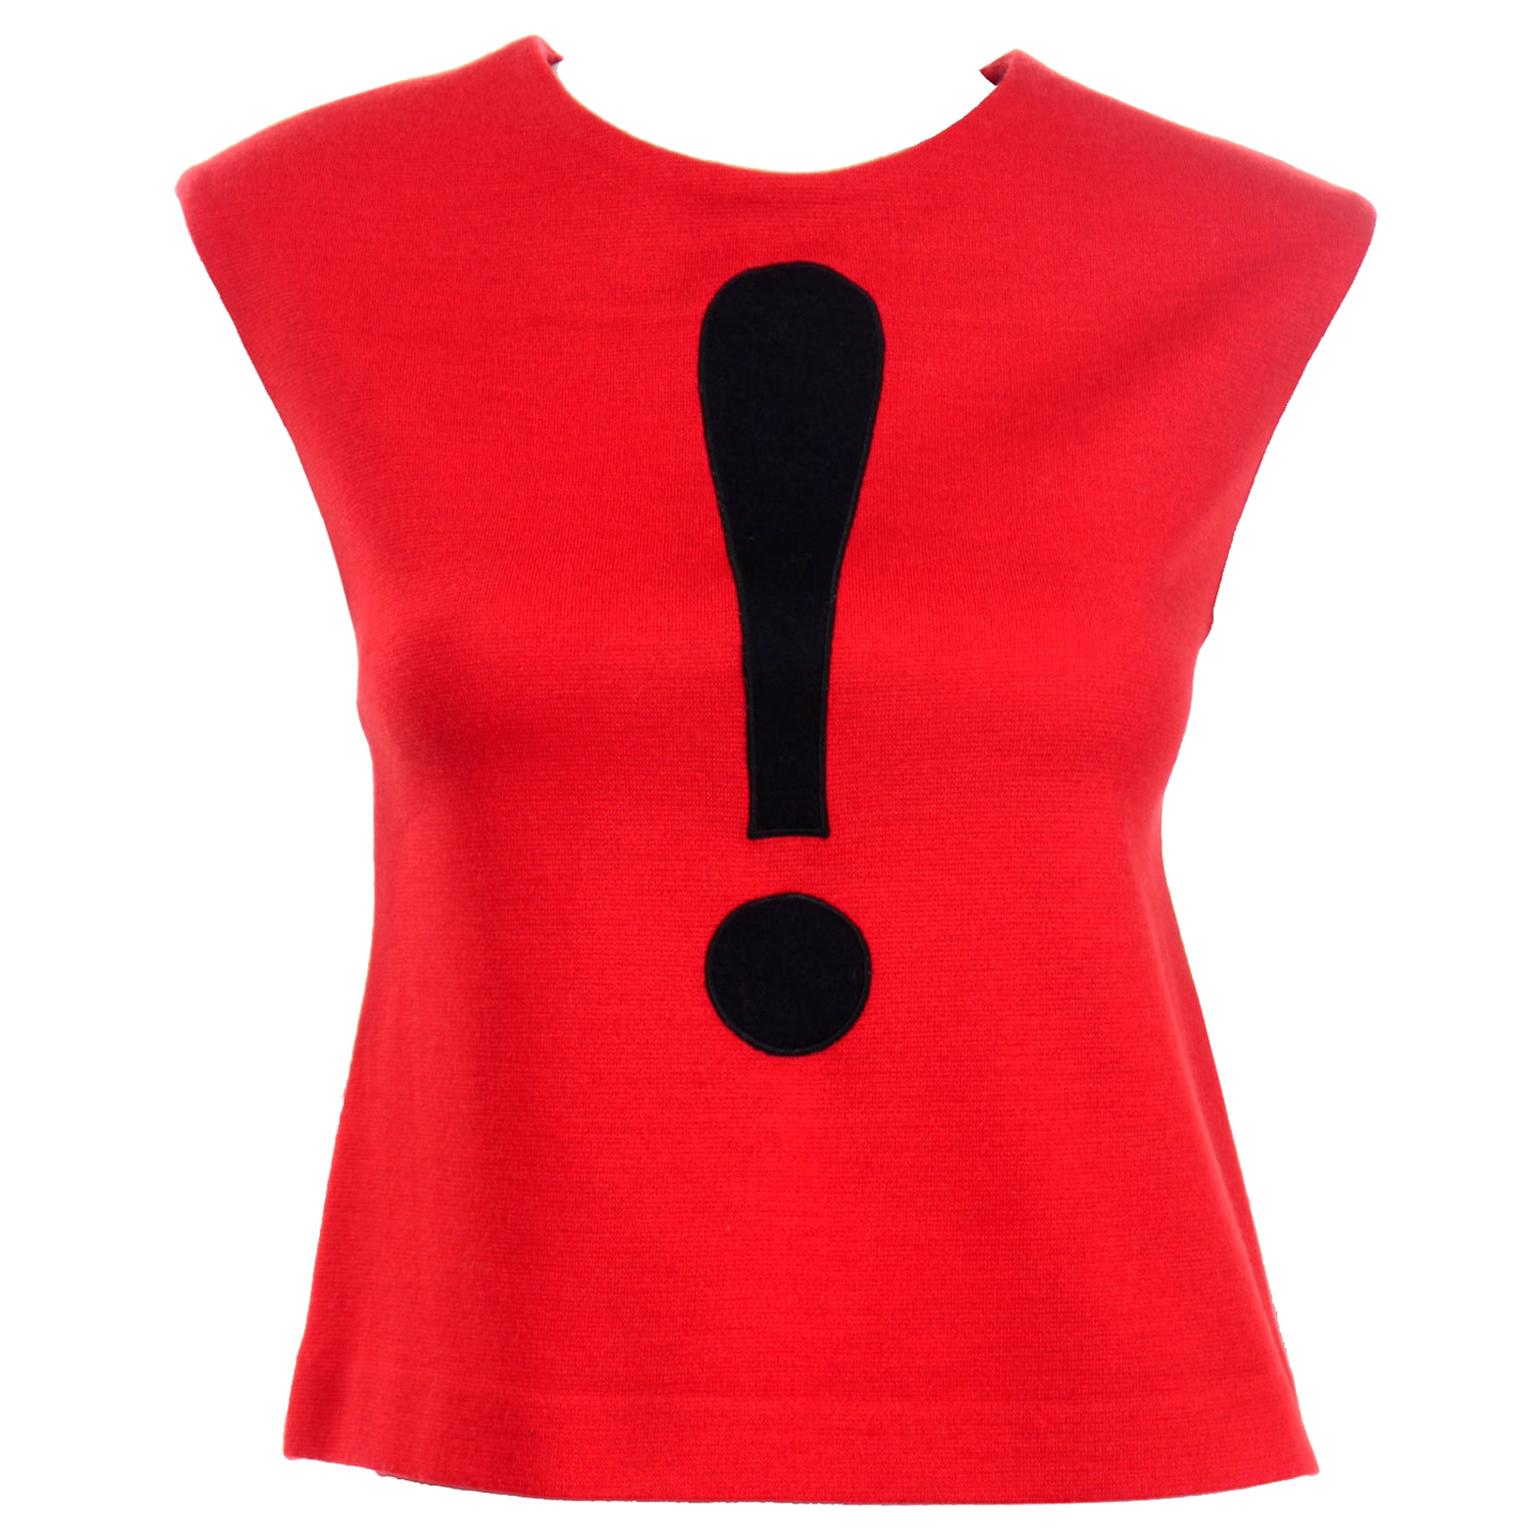 Vintage Moschino Red and Black Exclamation Mark Sleeveless Top